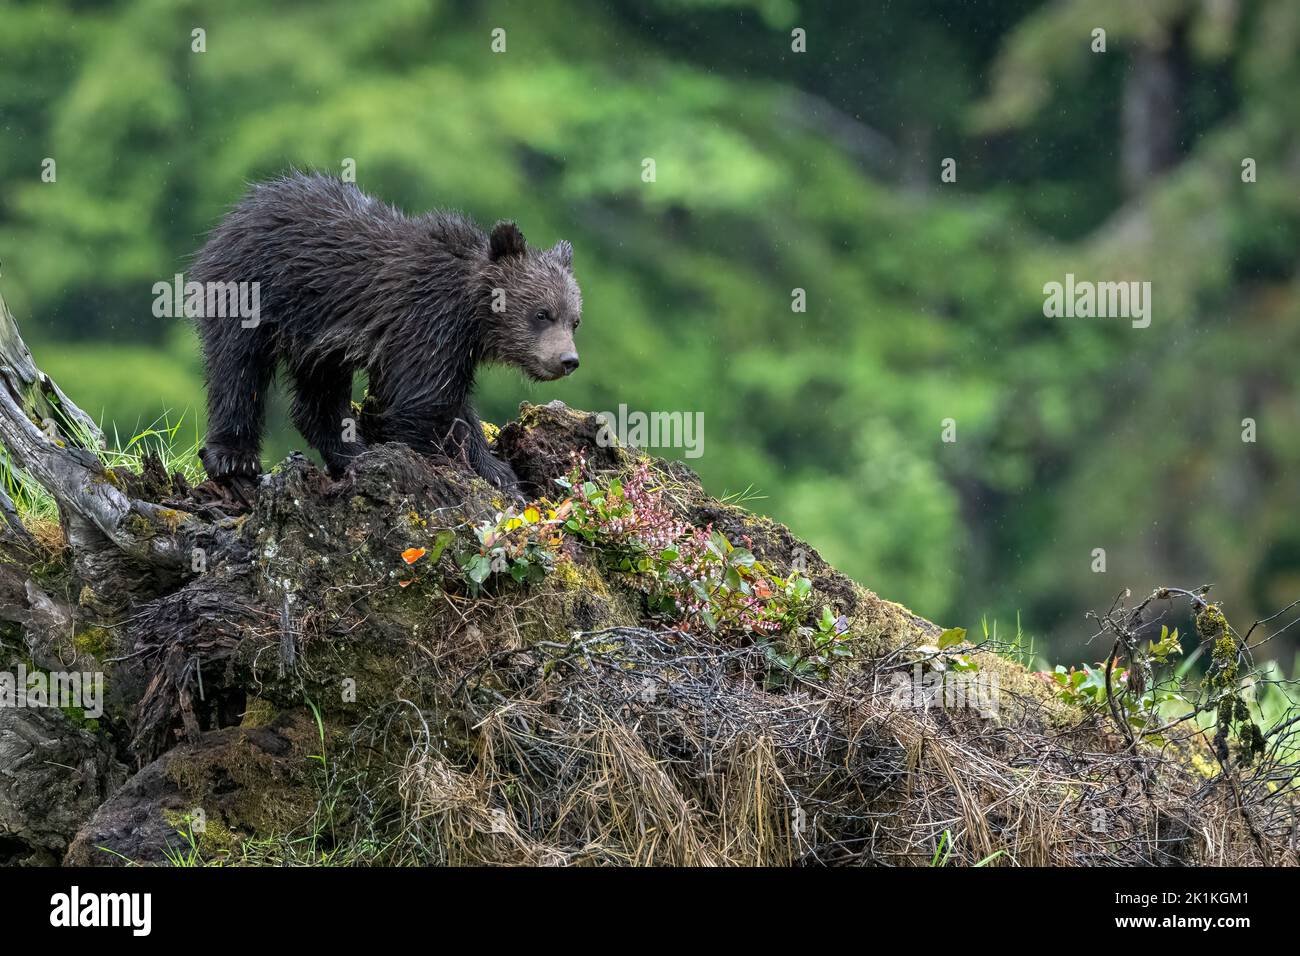 A cute, young grizzly bear cub explores a fallen tree trunk in Canada's Great Bear Rainforest Stock Photo